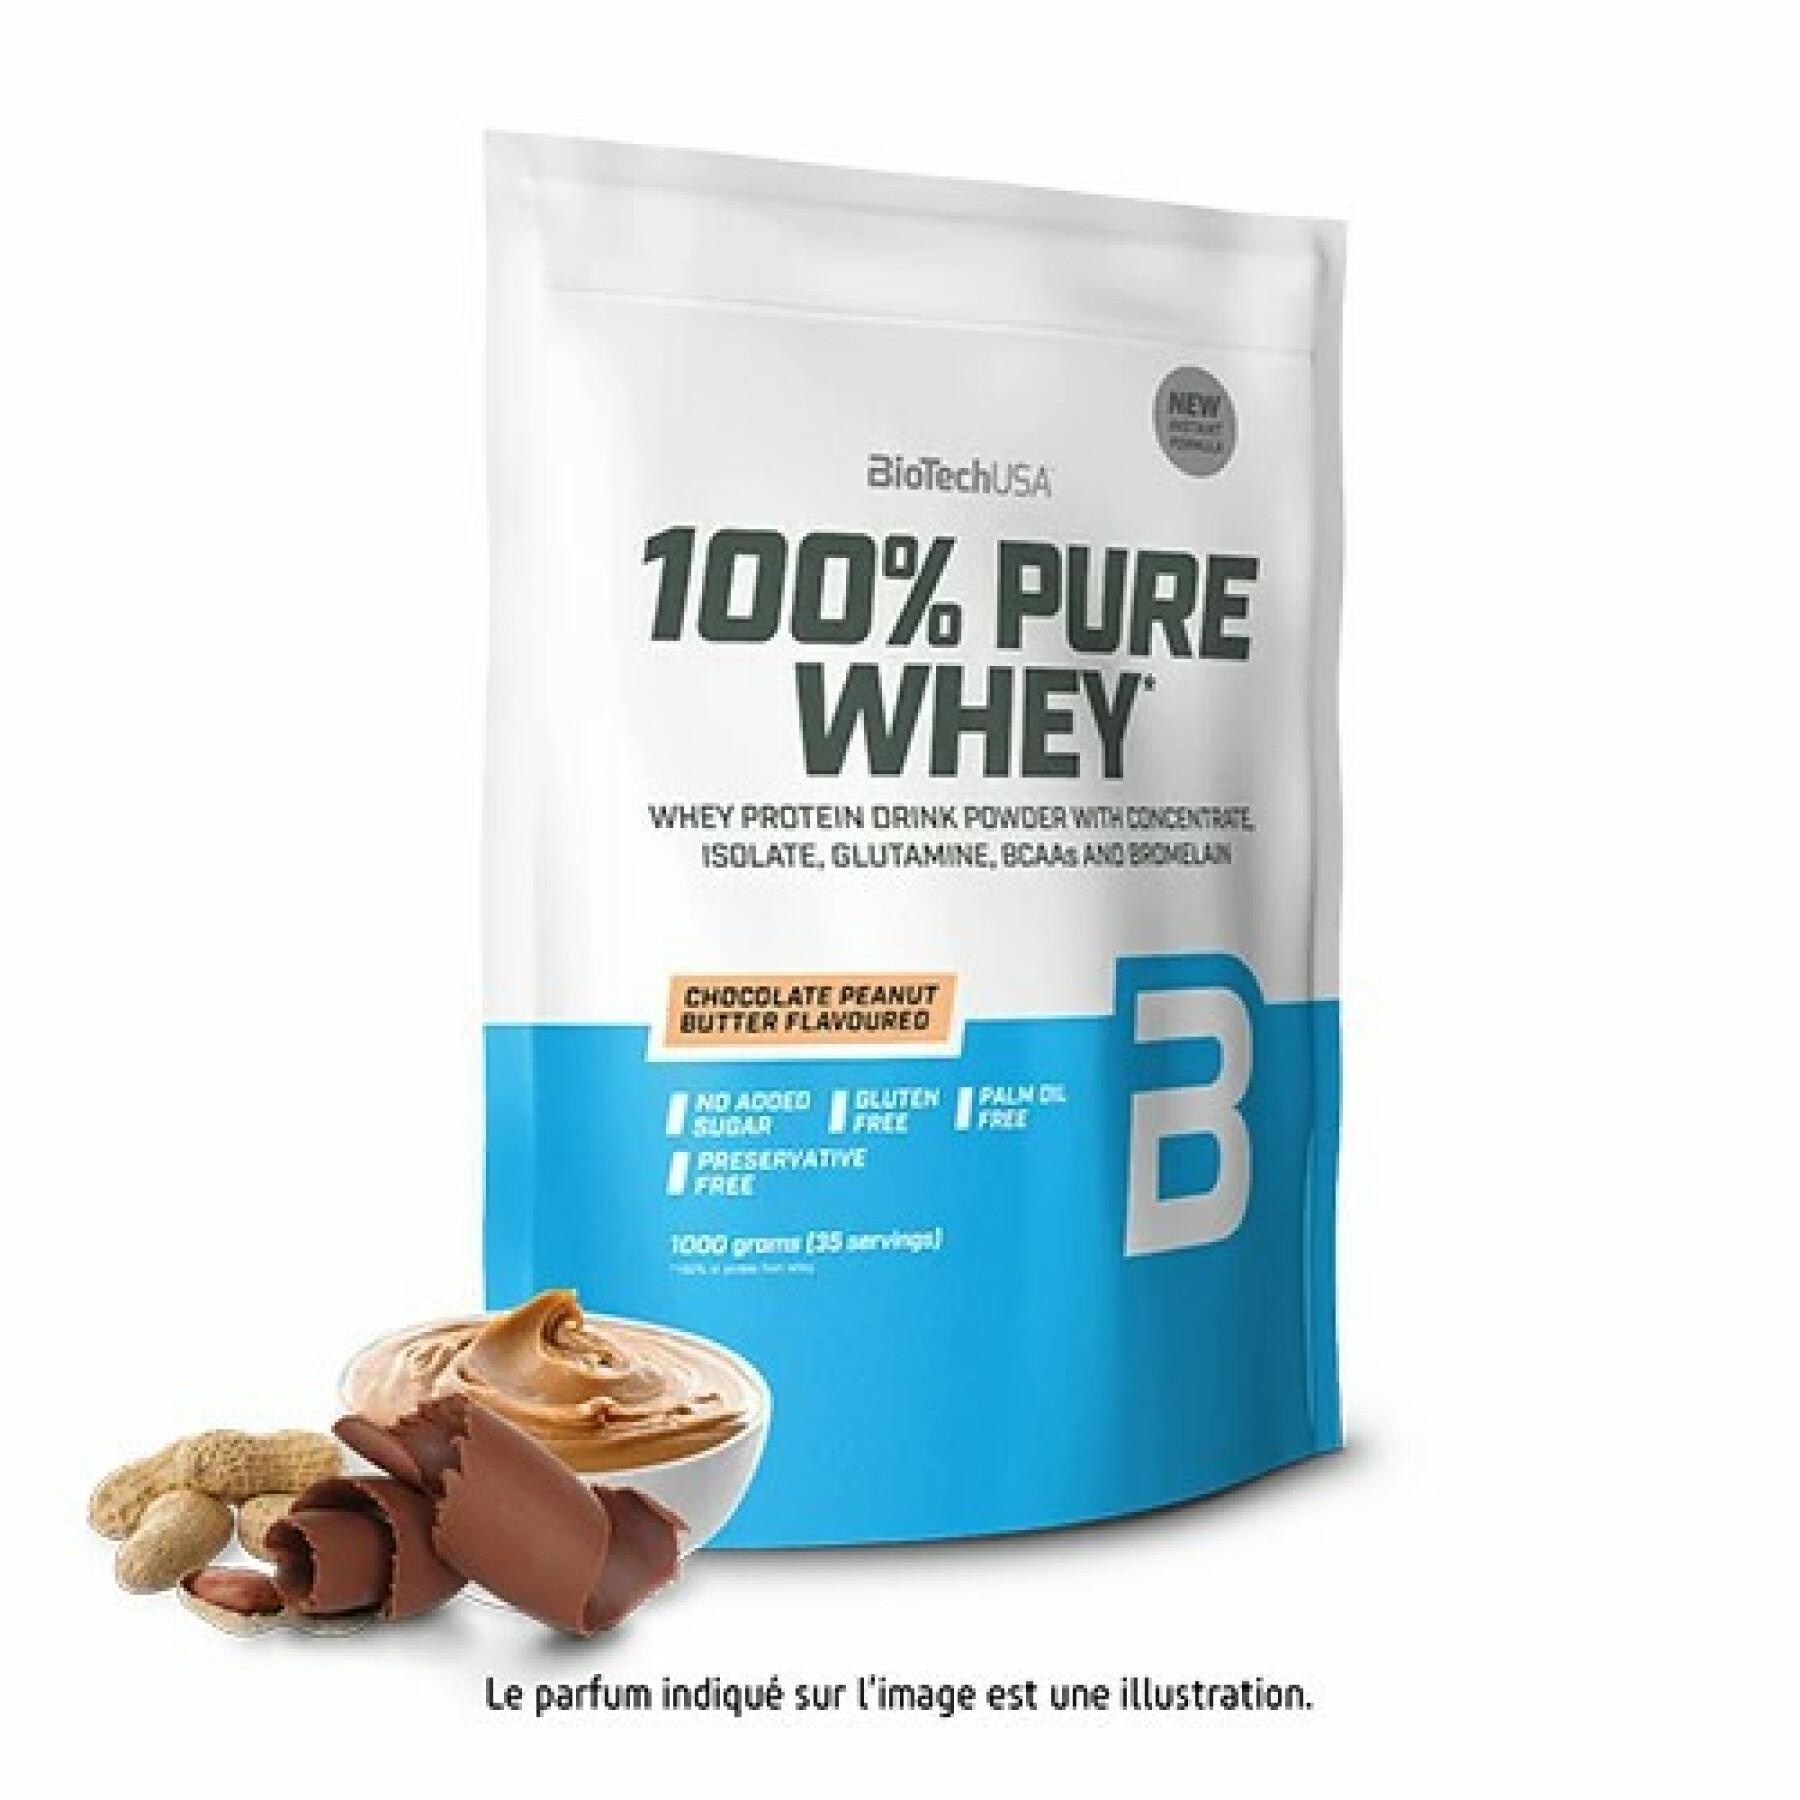 100% pure whey protein bags Biotech USA - Caramel-cappuccino - 1kg